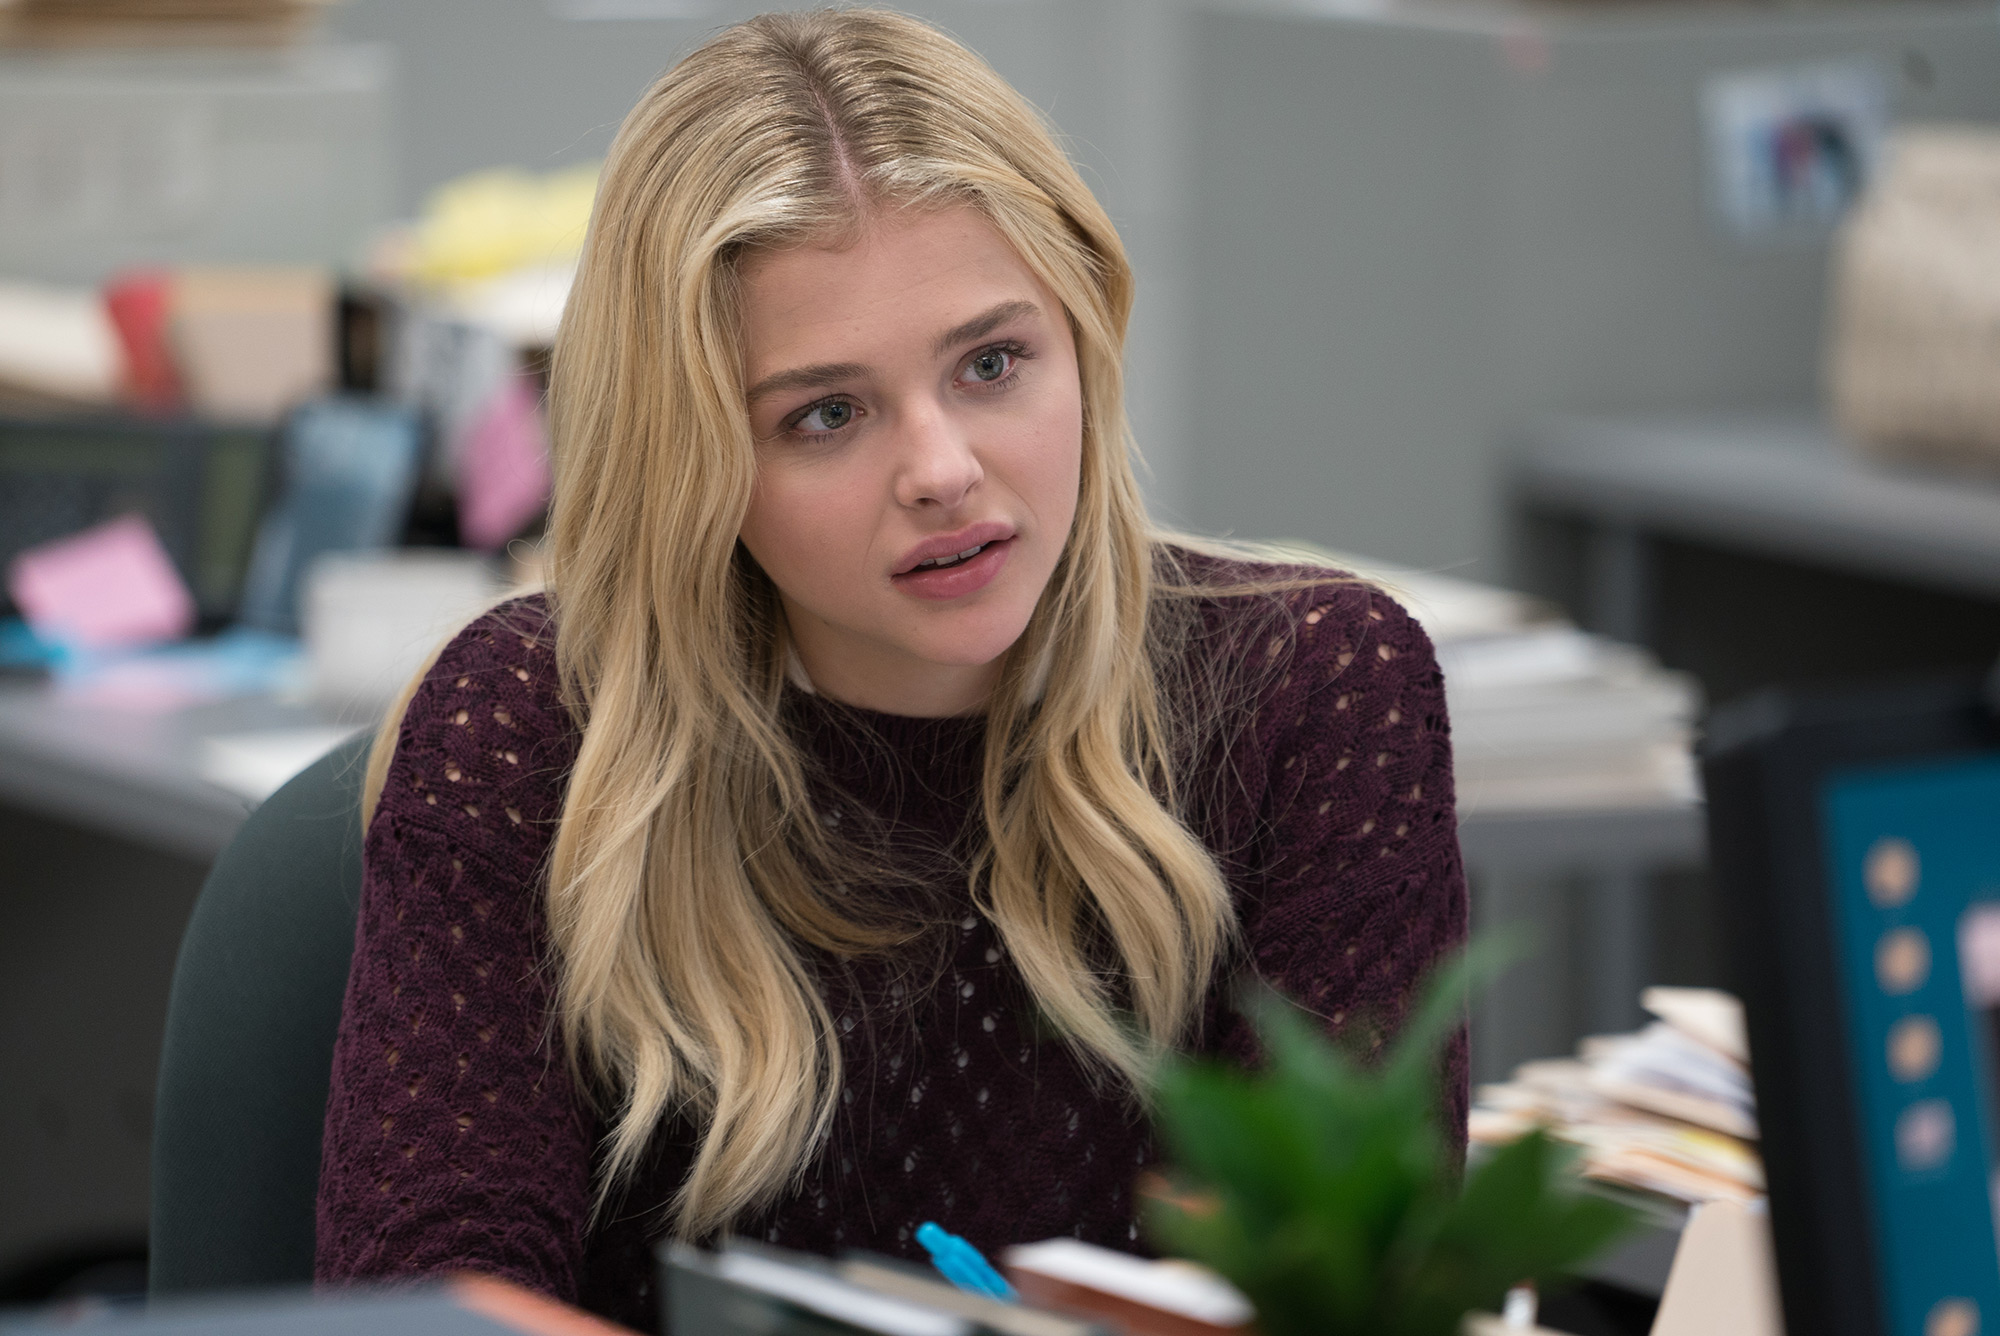 Seven superb Chloe Grace Moretz movies (and where you can watch them)